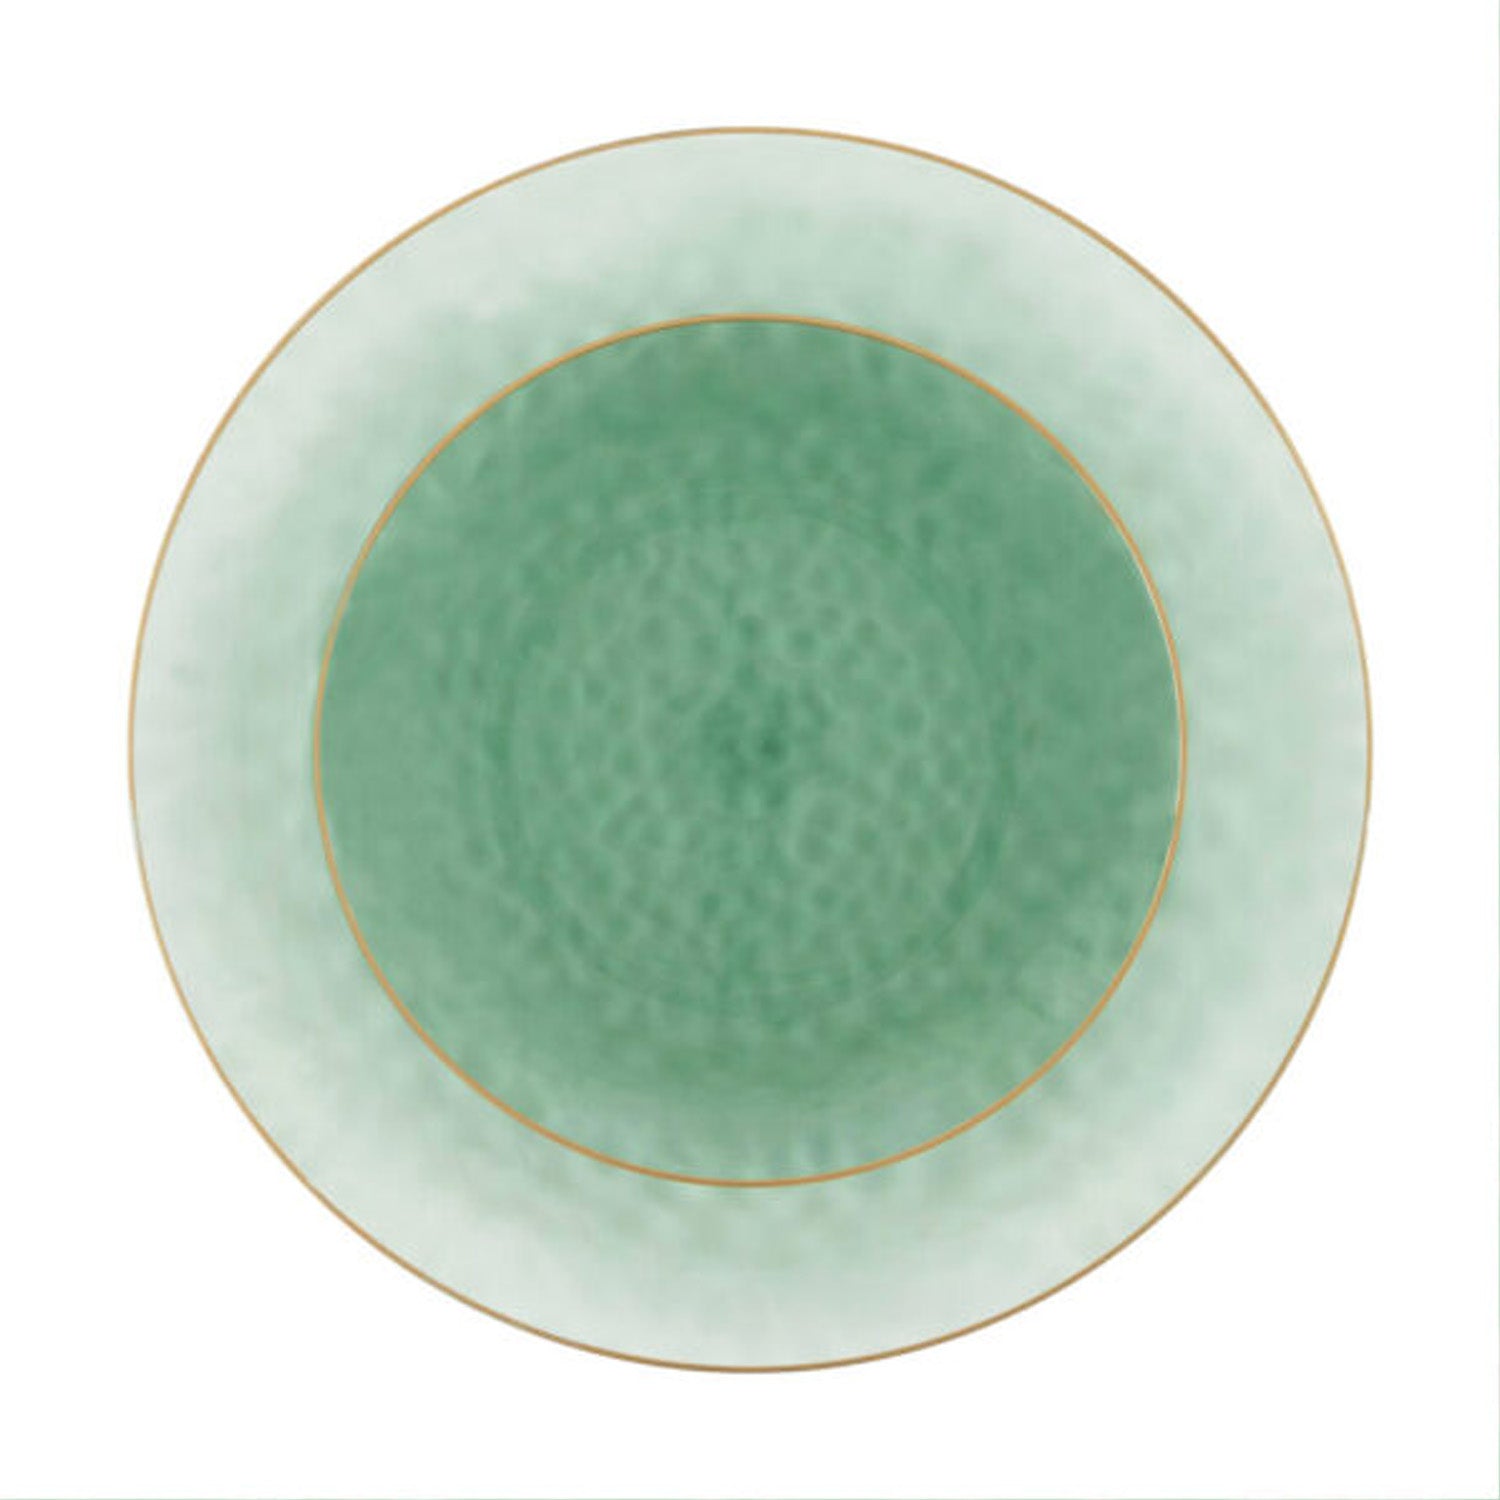 Organic Hammered Green Gold Rim 7″ Plates Tablesettings Blue Sky   